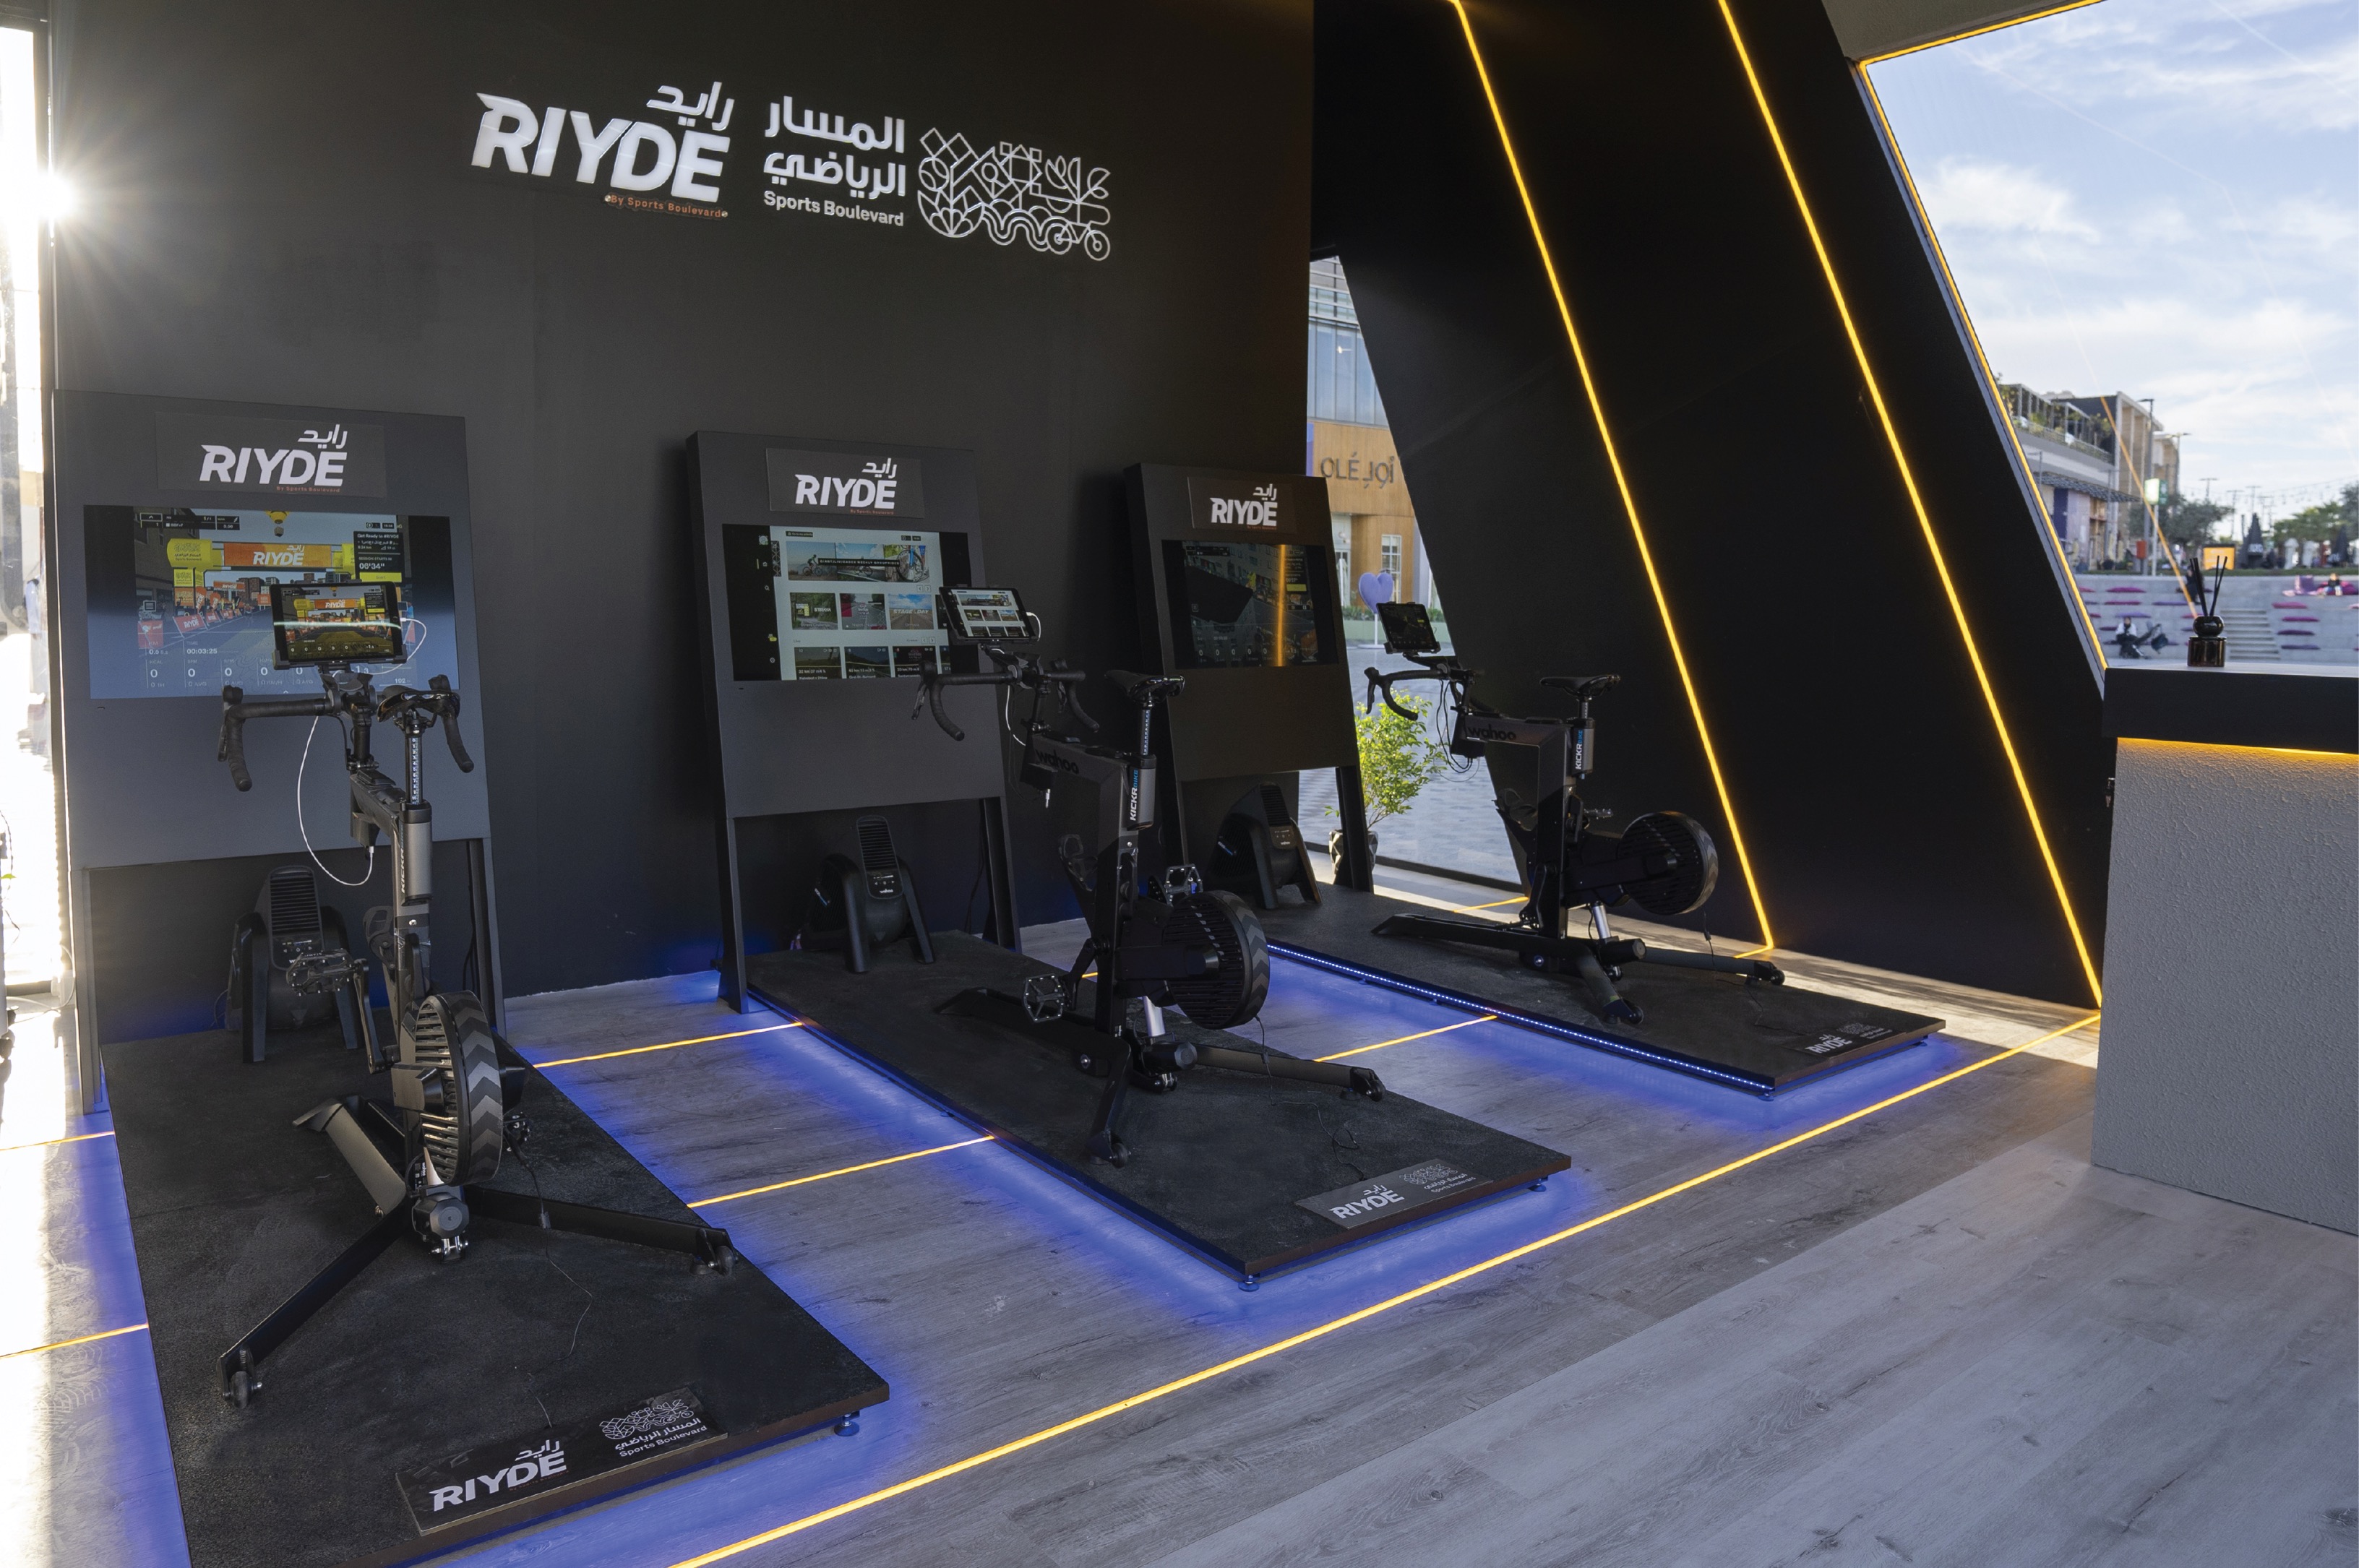 The Sports Boulevard has launched Riyadh’s immersive cycling experience, RIYDE, in partnership with global technology company the pioneering vir